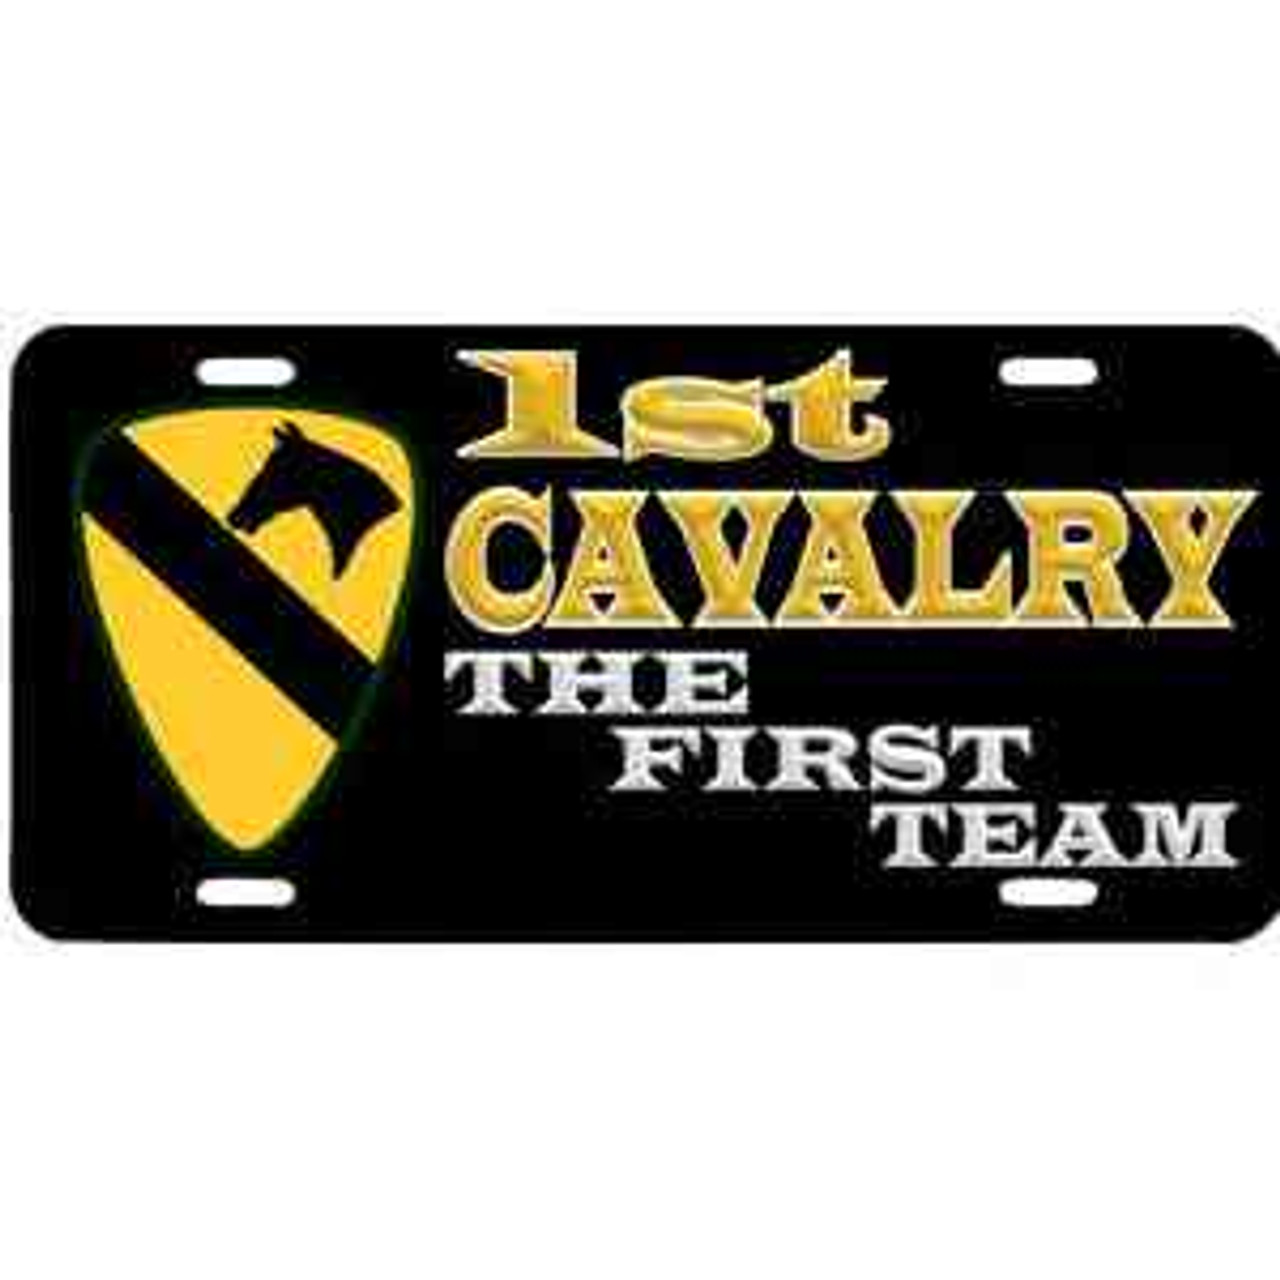 army 1st cavalry division first team license plate